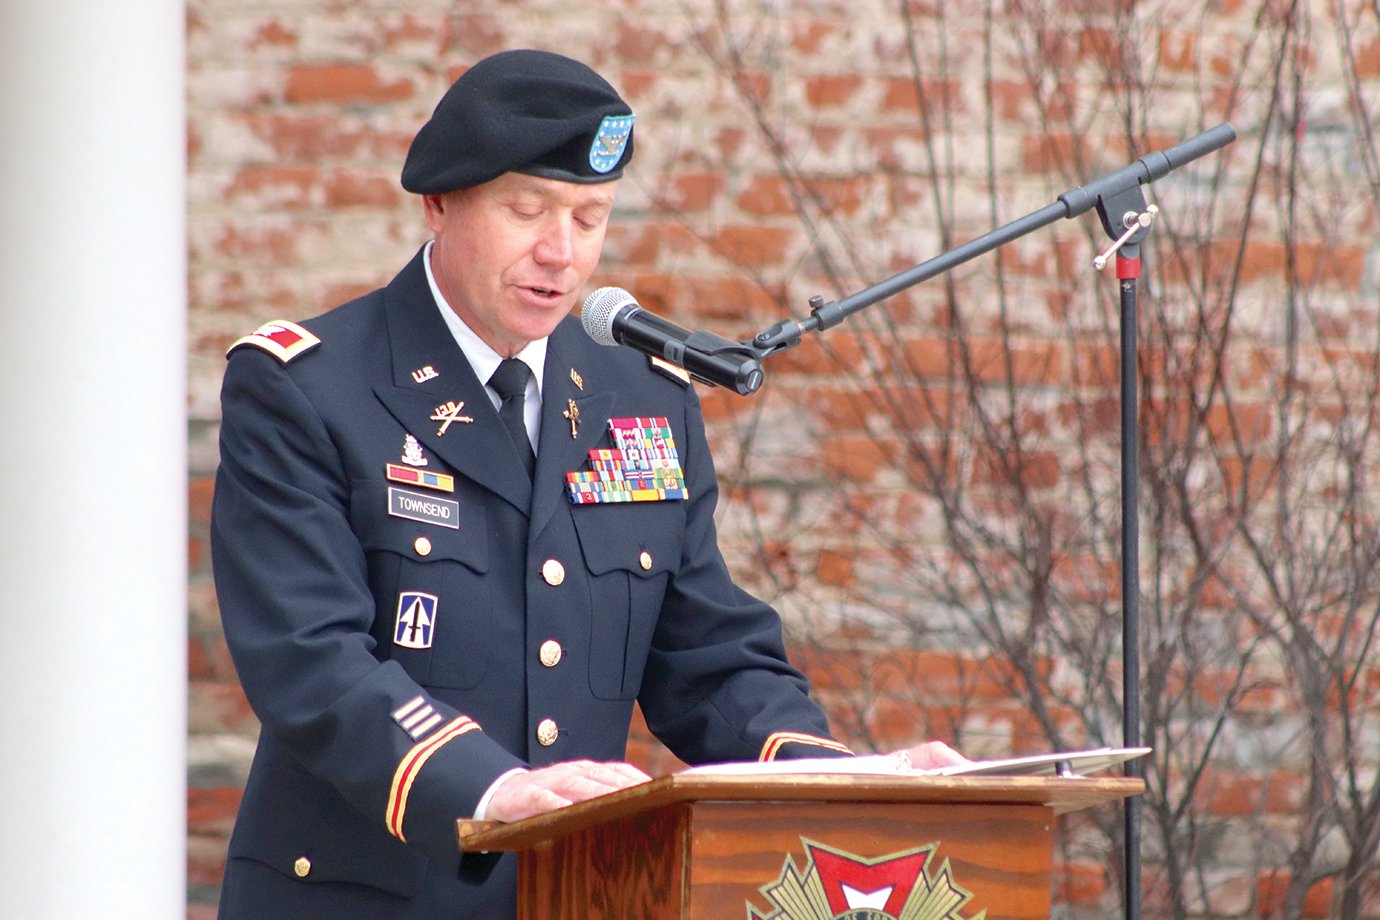 Col. Todd Townsend speaks of his time in Iraq and various other locations as he remembers his service and the soldiers who served with him; the colonel represented tens of thousands of America's military veterans Wednesday at Canine Plaza during an annual Veterans Day ceremony.